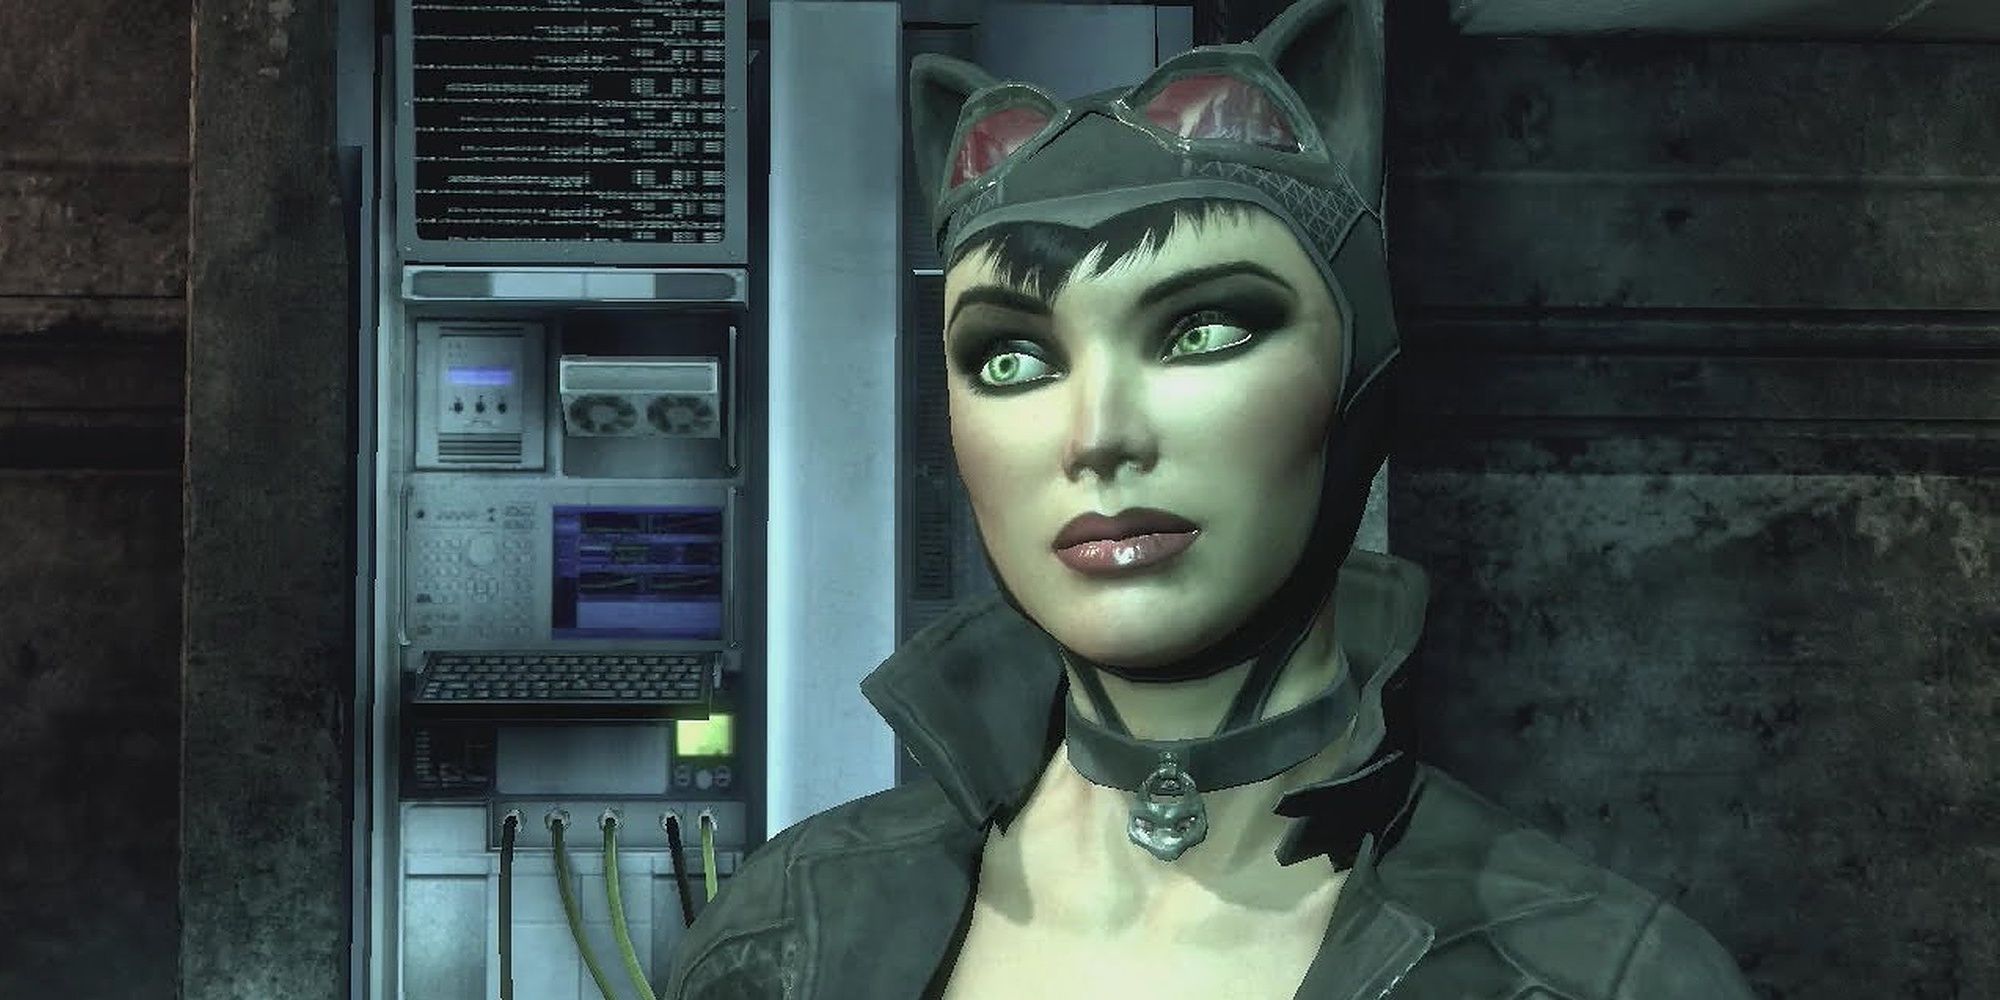 Catwoman as she appears in the Batman: Arkham series